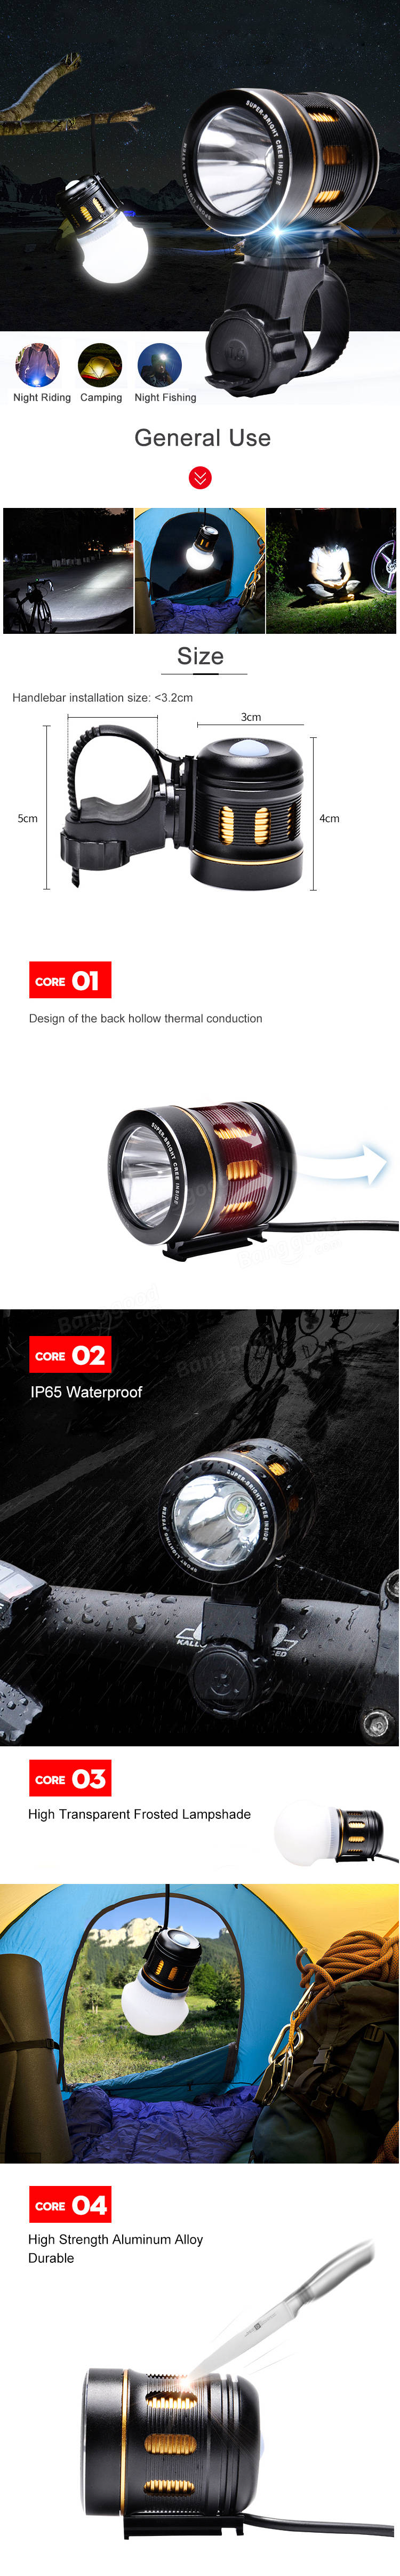 XANES 1000LM T6 Bicycle Front Light IP65 120° Wide Angle with Lampshade HeadLamp